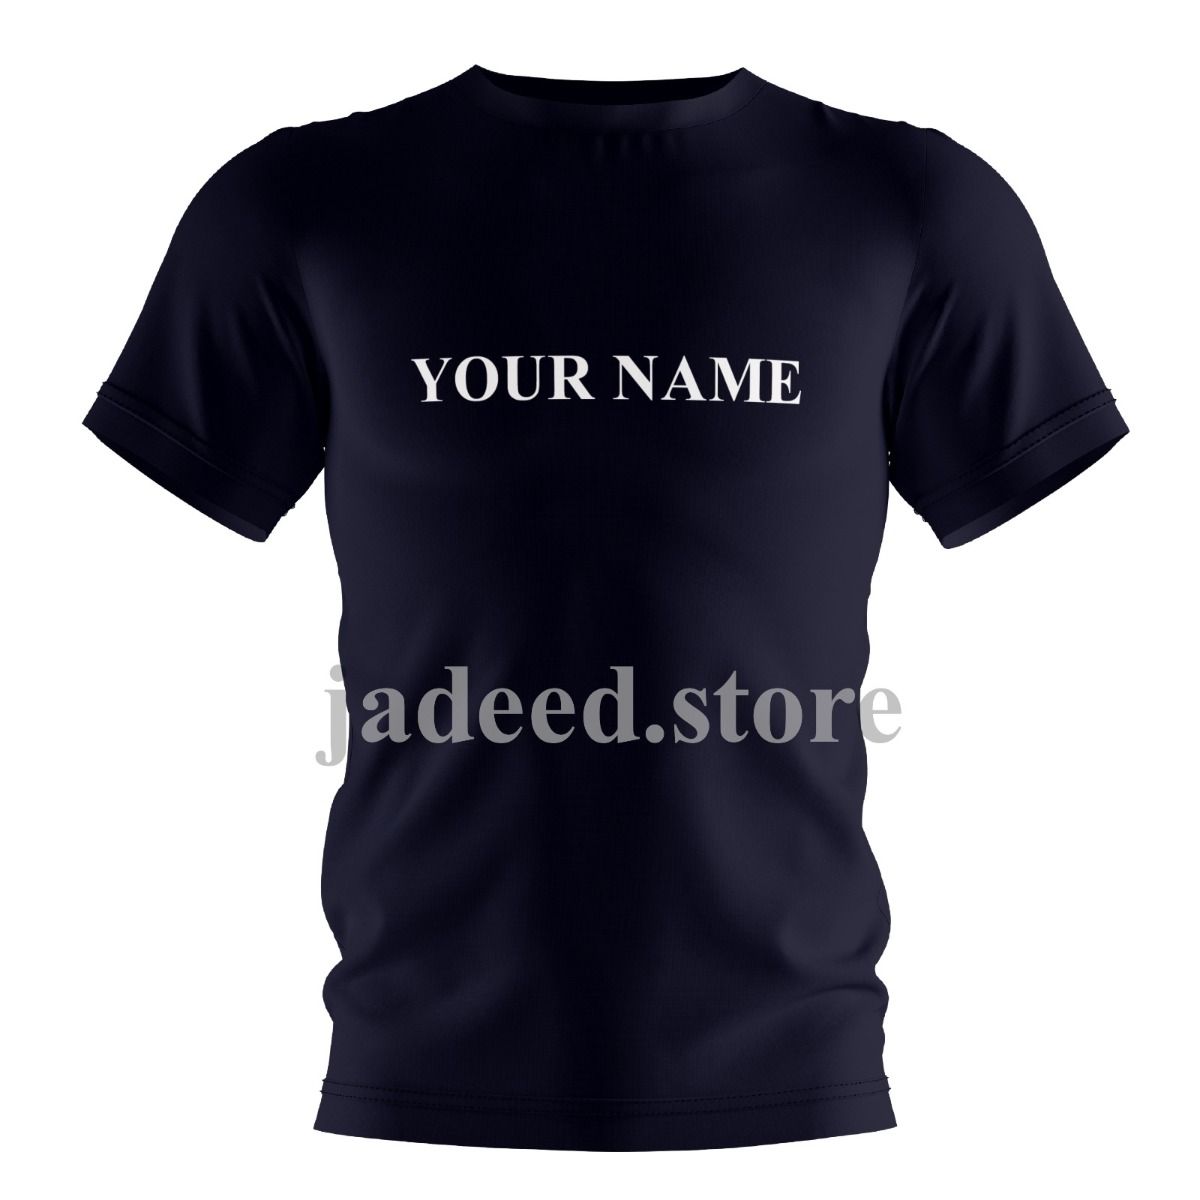 Customized T-Shirt Black/ Navy Blue Colour With Name in White Foil Printing on One Sides